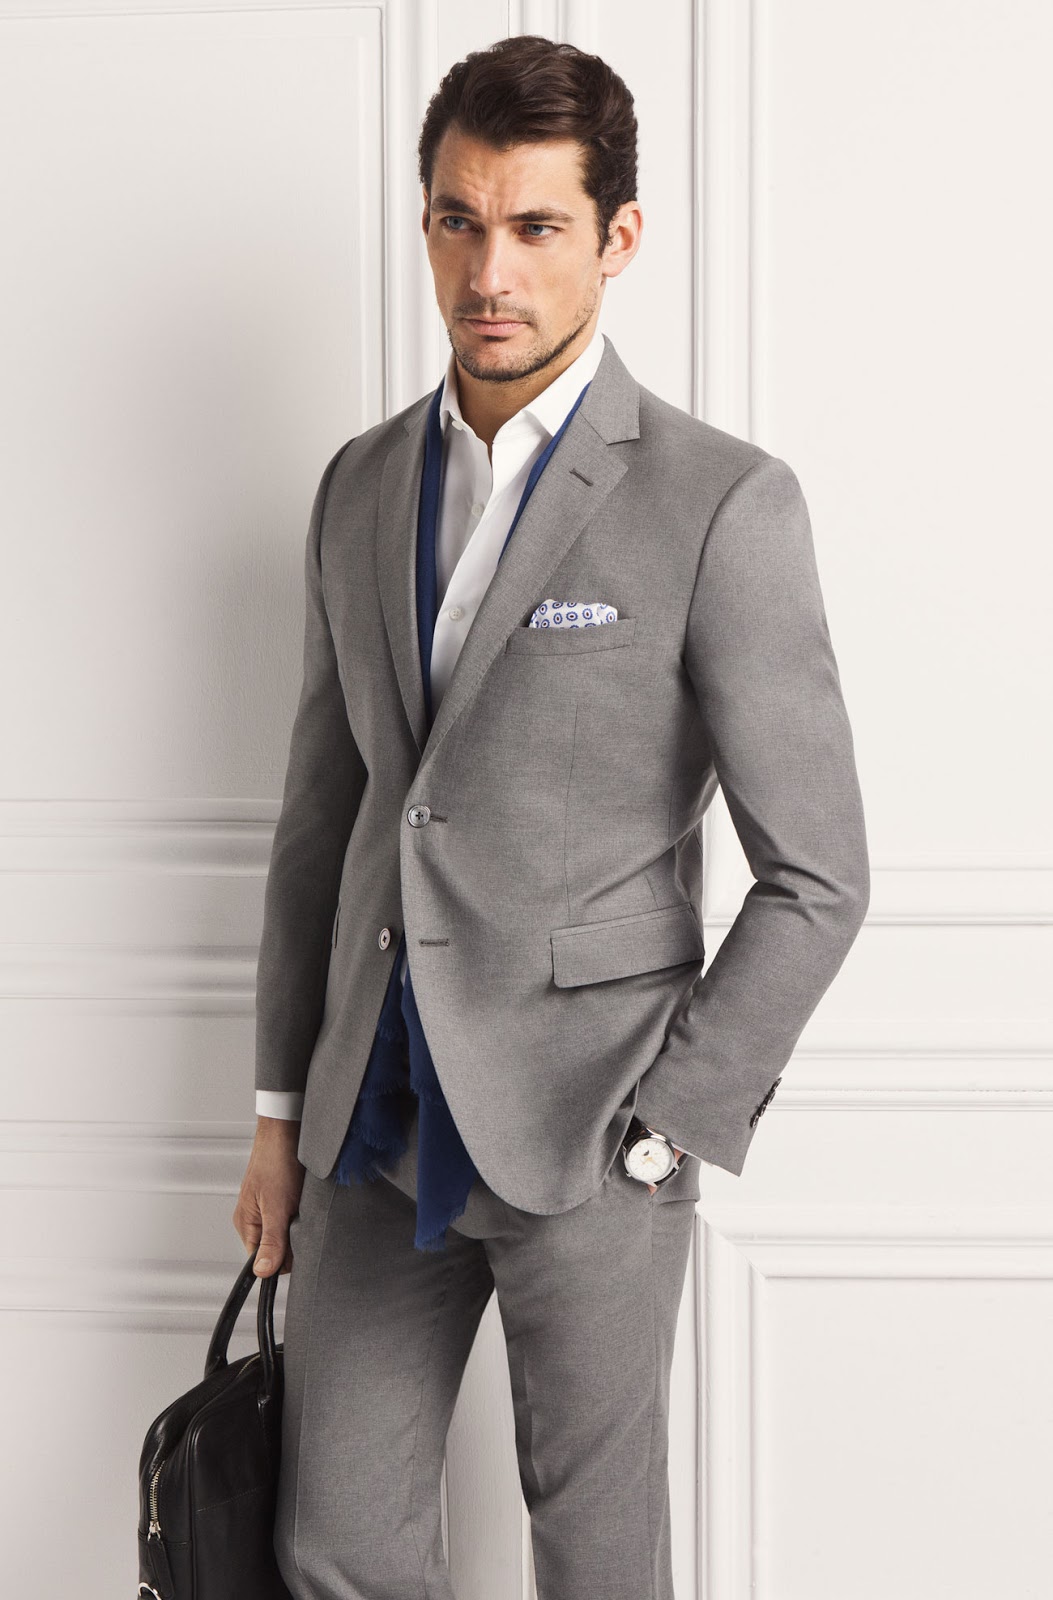 DUTTI The 689 5th Avenue Suits & Shirts Suits